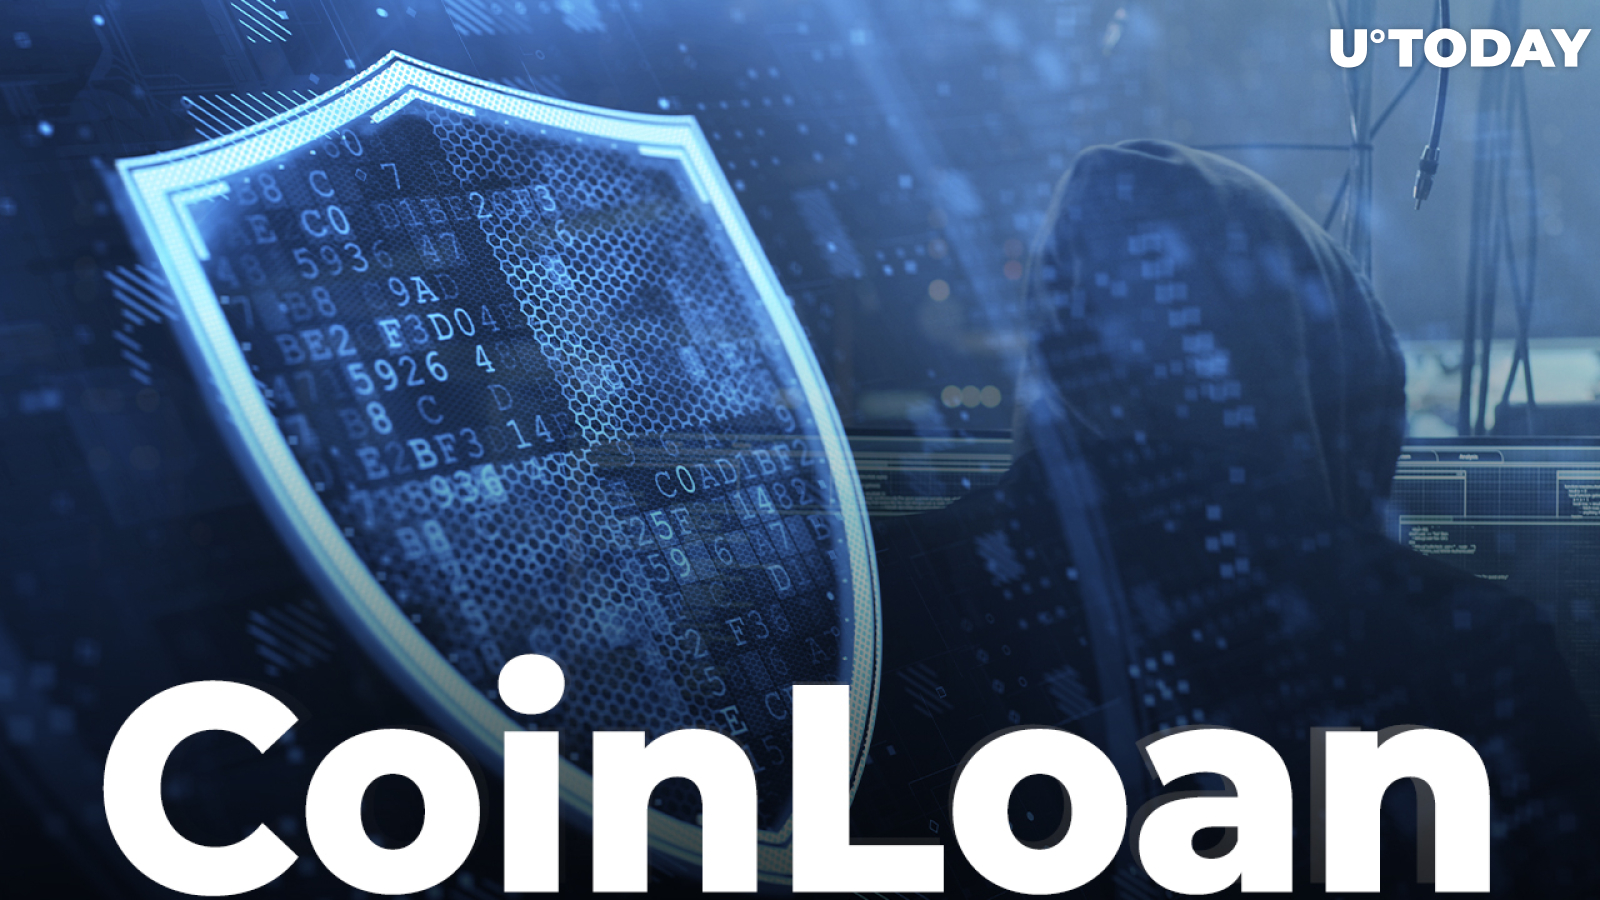 CoinLoan’s Fraud Detection Team Helped in Mitigating Critical Attack on Crypto Wallets